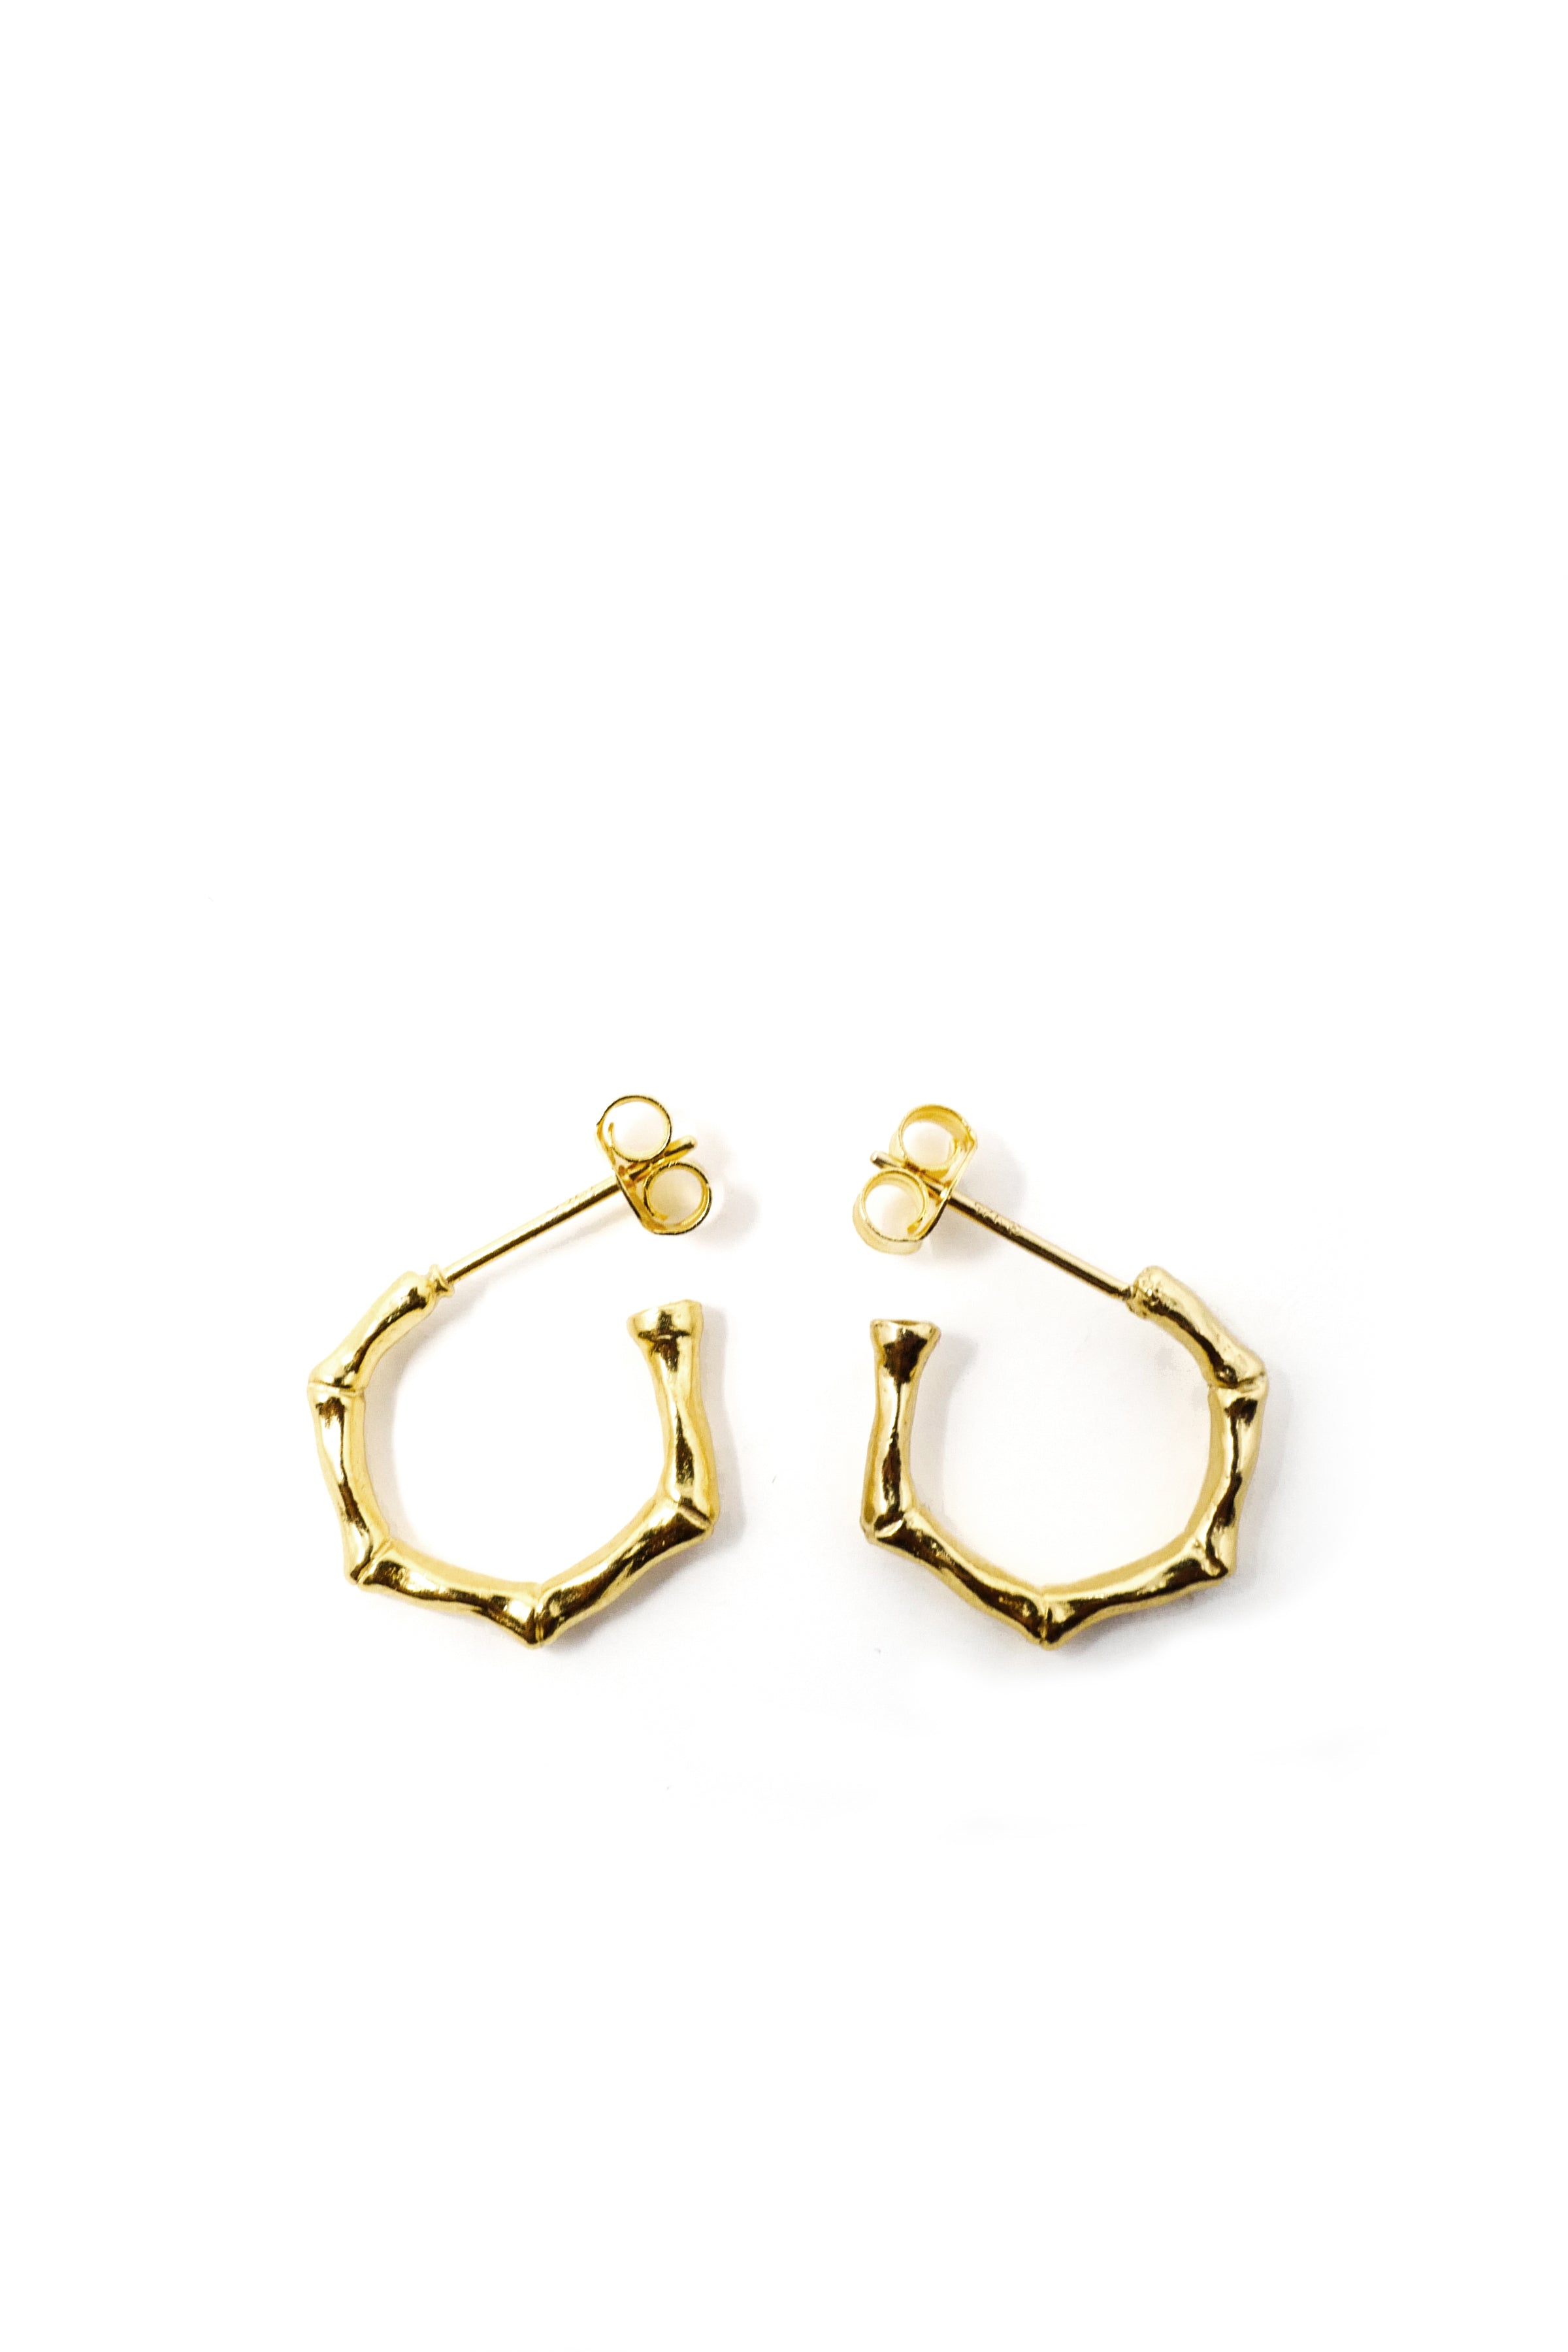 Buy Chunky Gold Hoops Heart Bamboo Earrings Valentines Gift Online in India   Etsy